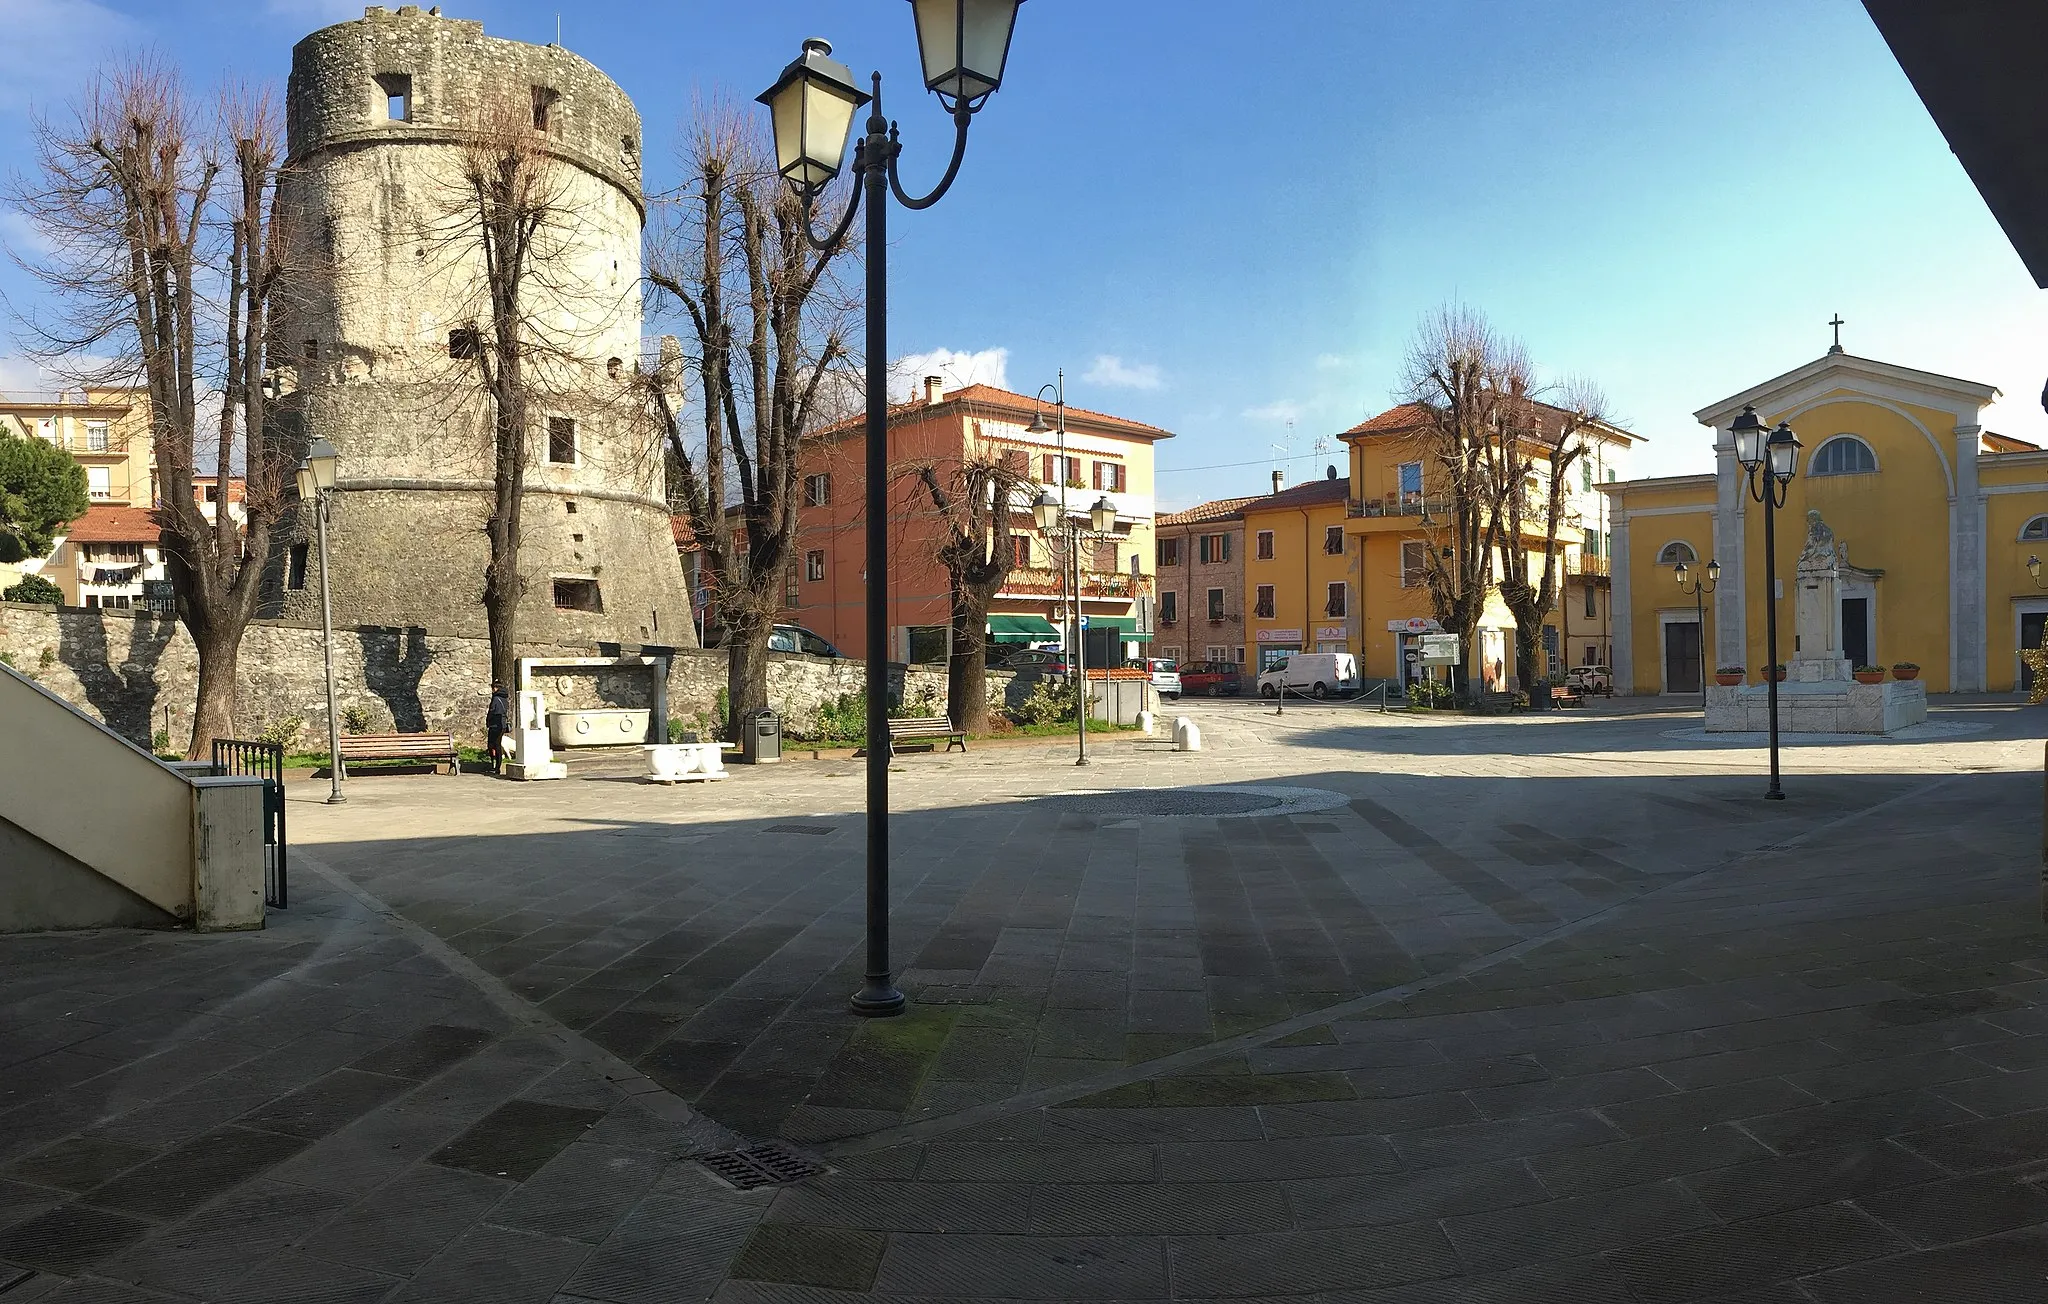 Photo showing: View of Piazza Finelli in Avenza, fraction of Carrara, with Castruccio Tower and San Pietro Church on background